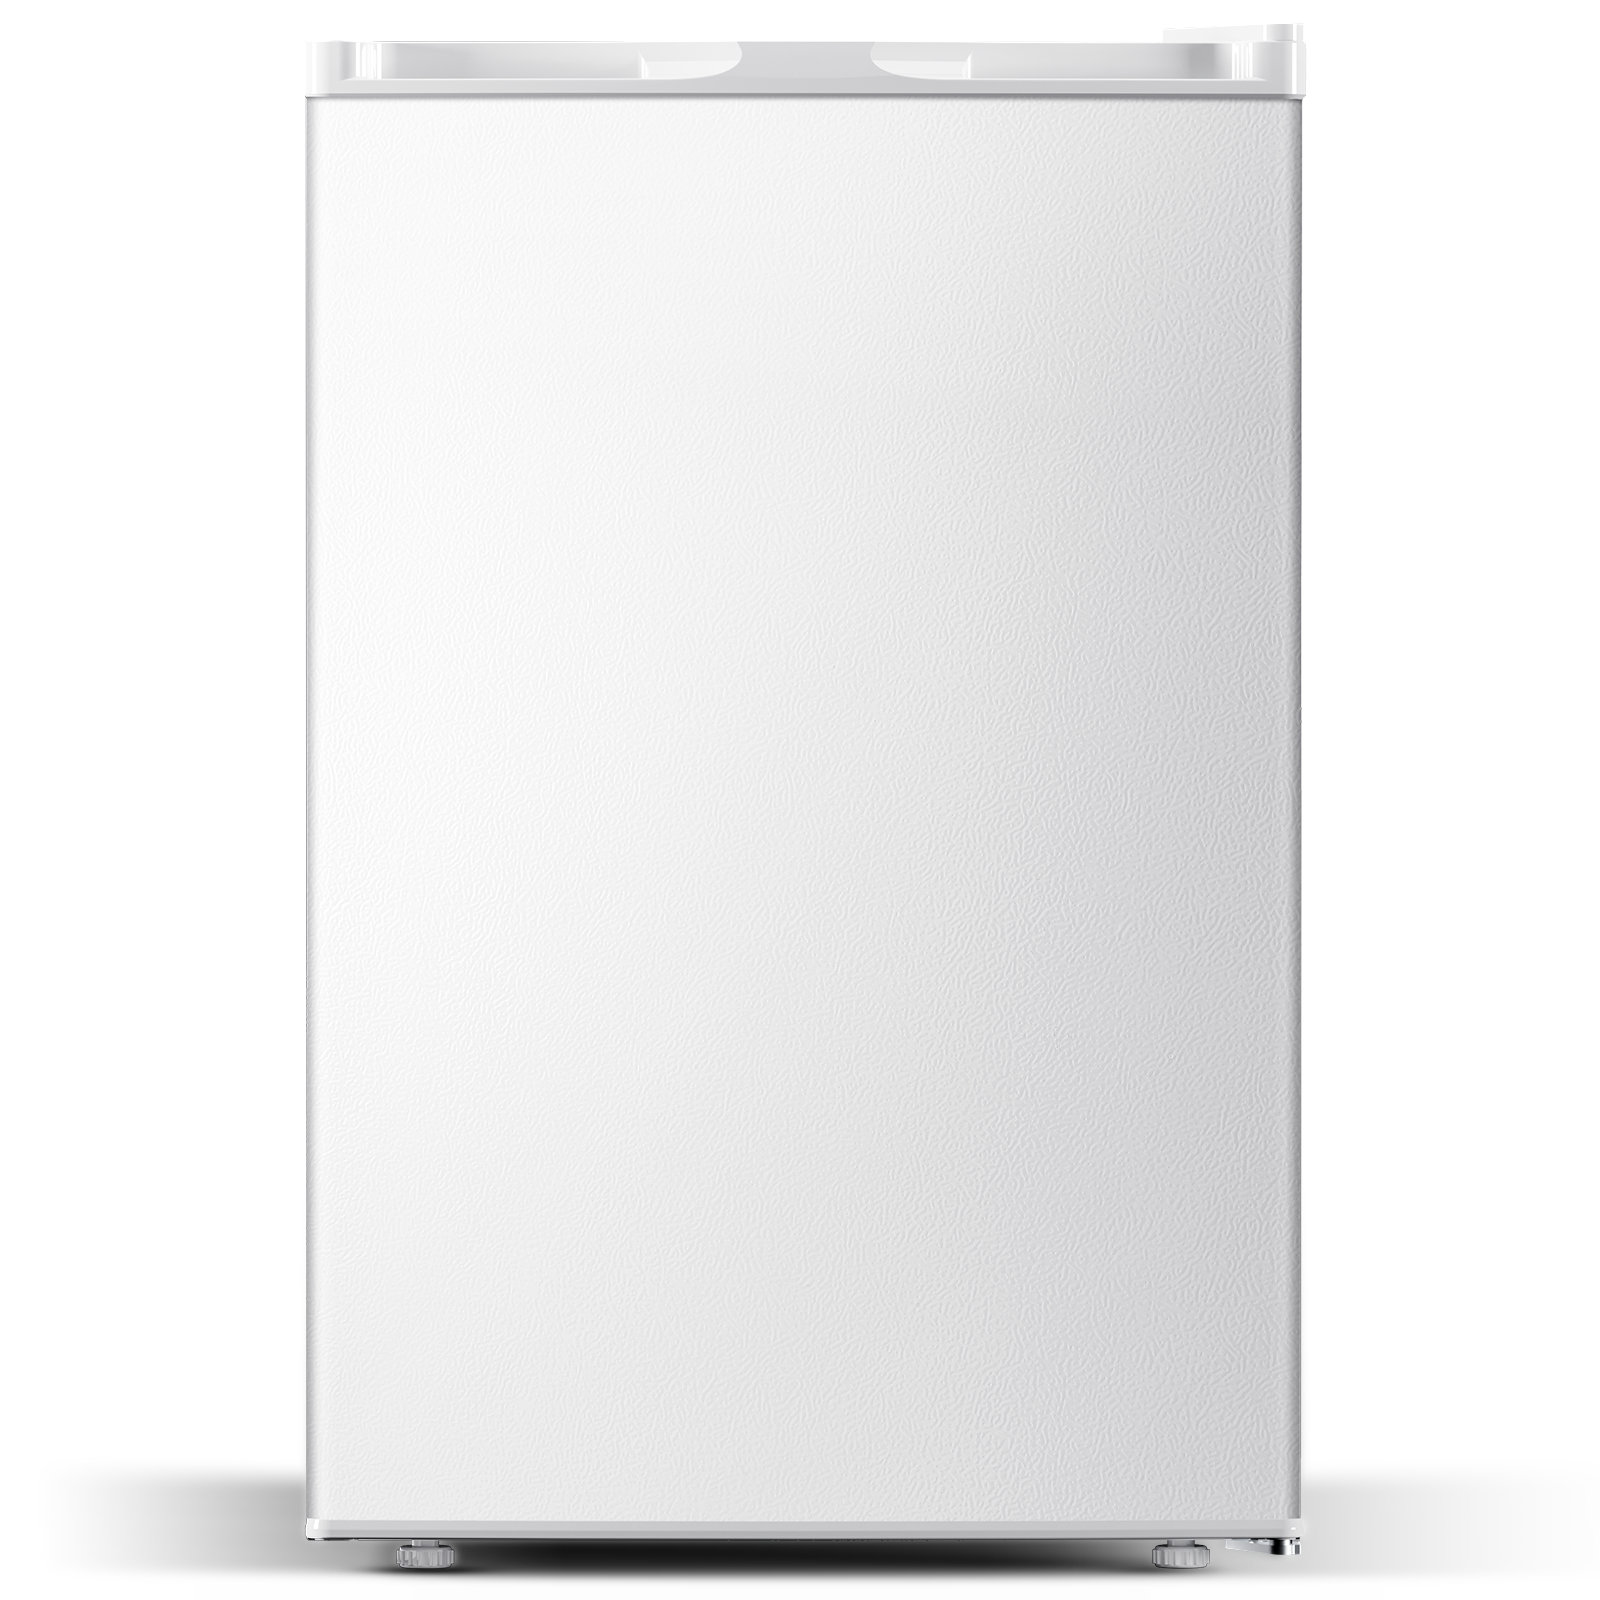 Haier 20.5-cu ft Frost-free Upright Freezer (White) at